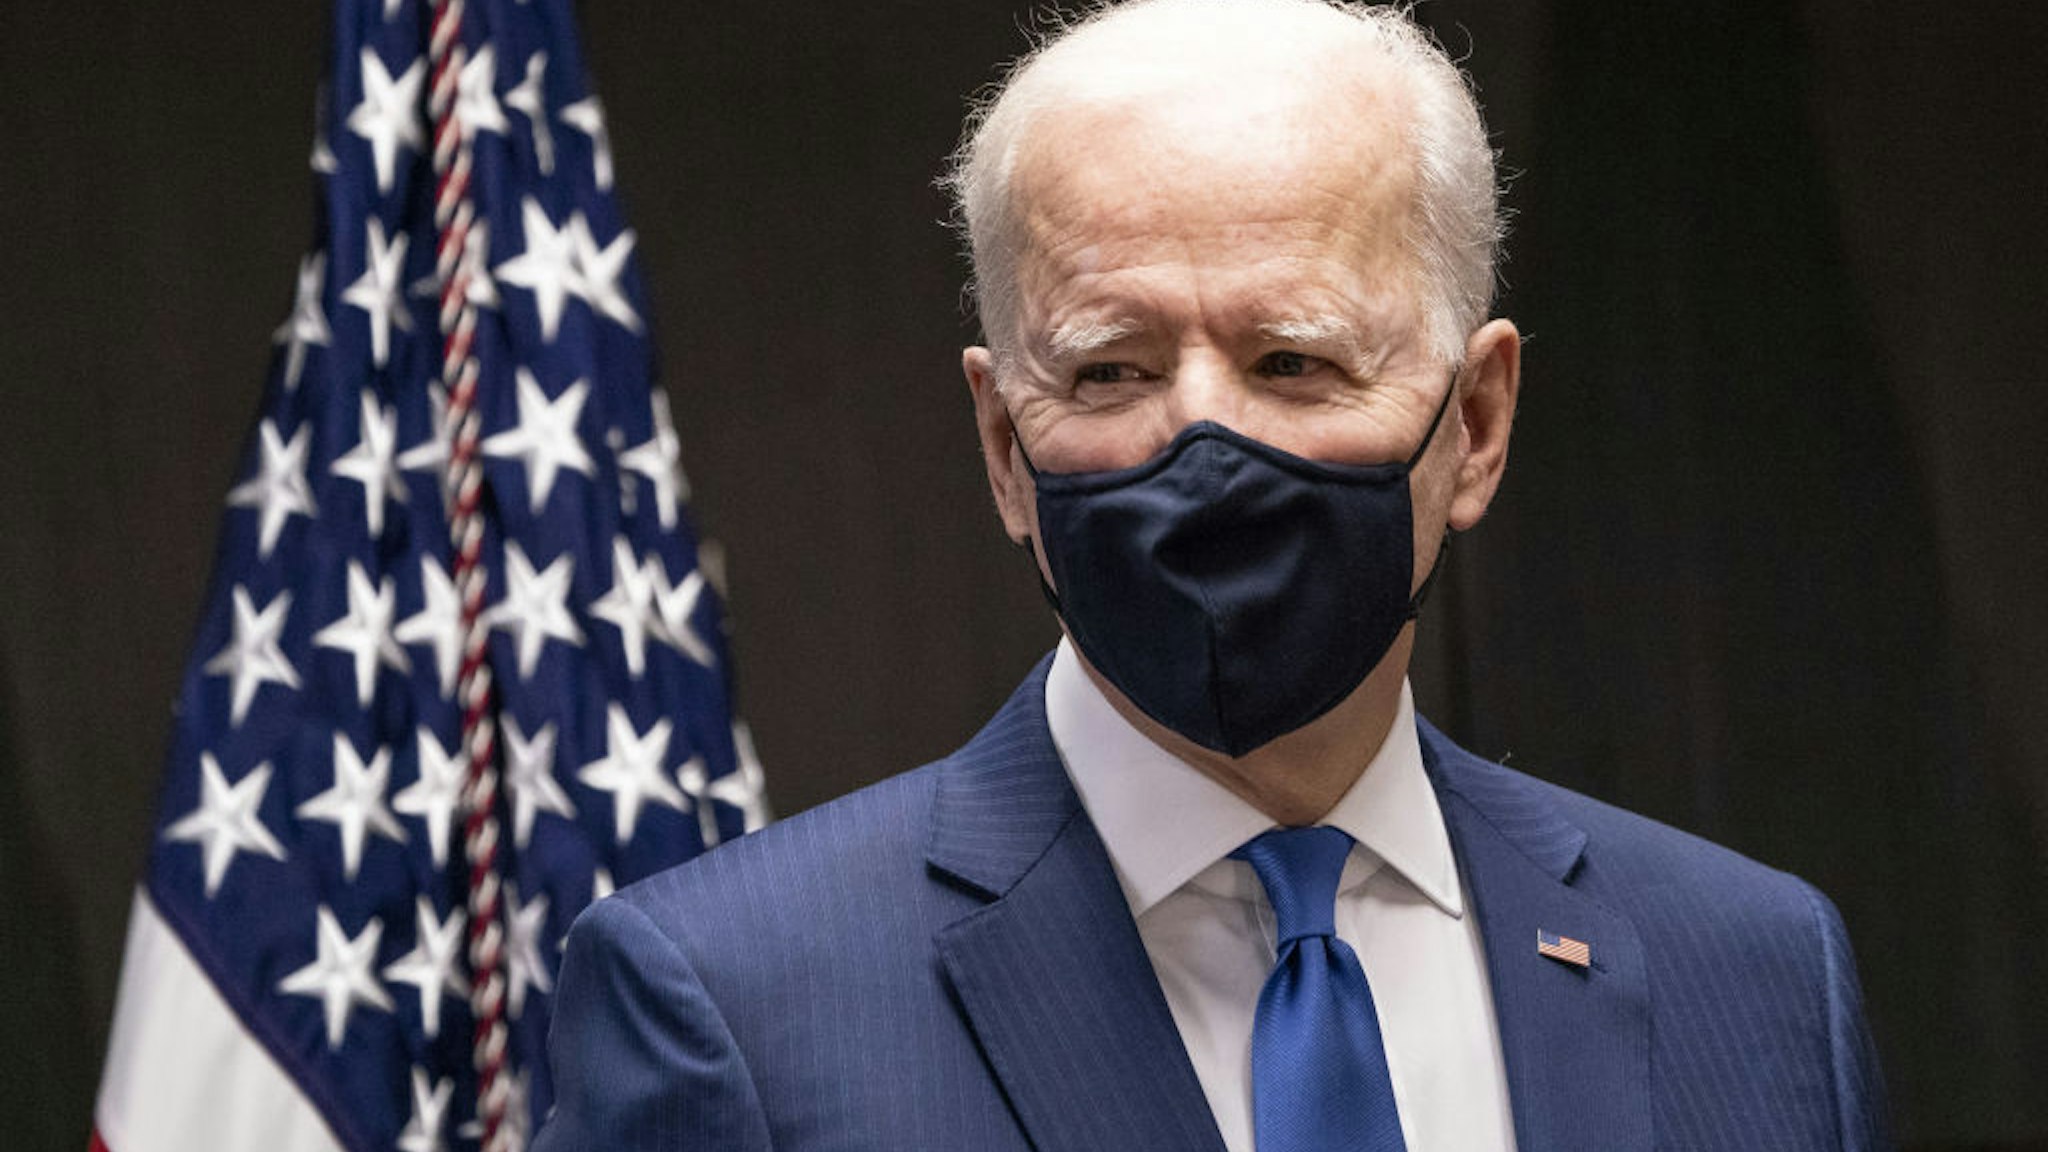 U.S. President Joe Biden speaks during a visit to a Veterans Affairs medical center Covid-19 vaccine site in Washington, D.C., U.S., on Monday, March 8, 2021. Vaccinated people can visit indoors without masks, but must still wear them in public and avoid large gatherings when around those who aren't immunized or are at high risk for contracting Covid-19, the CDC said today.